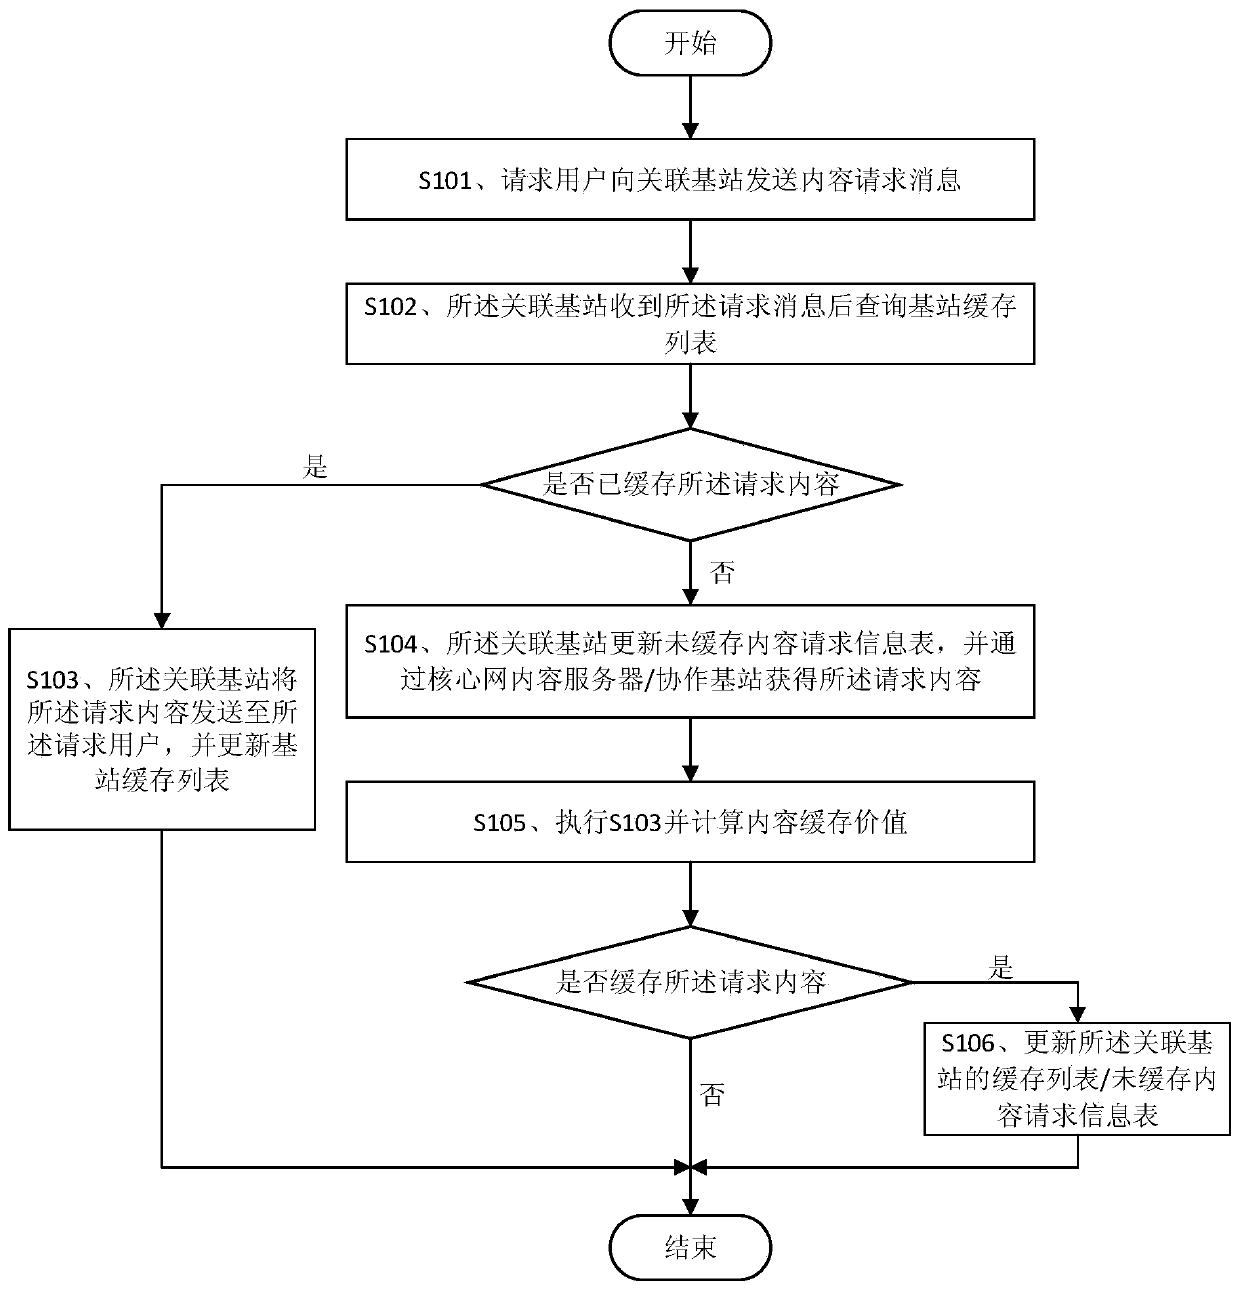 Content cache management method based on base station cooperation